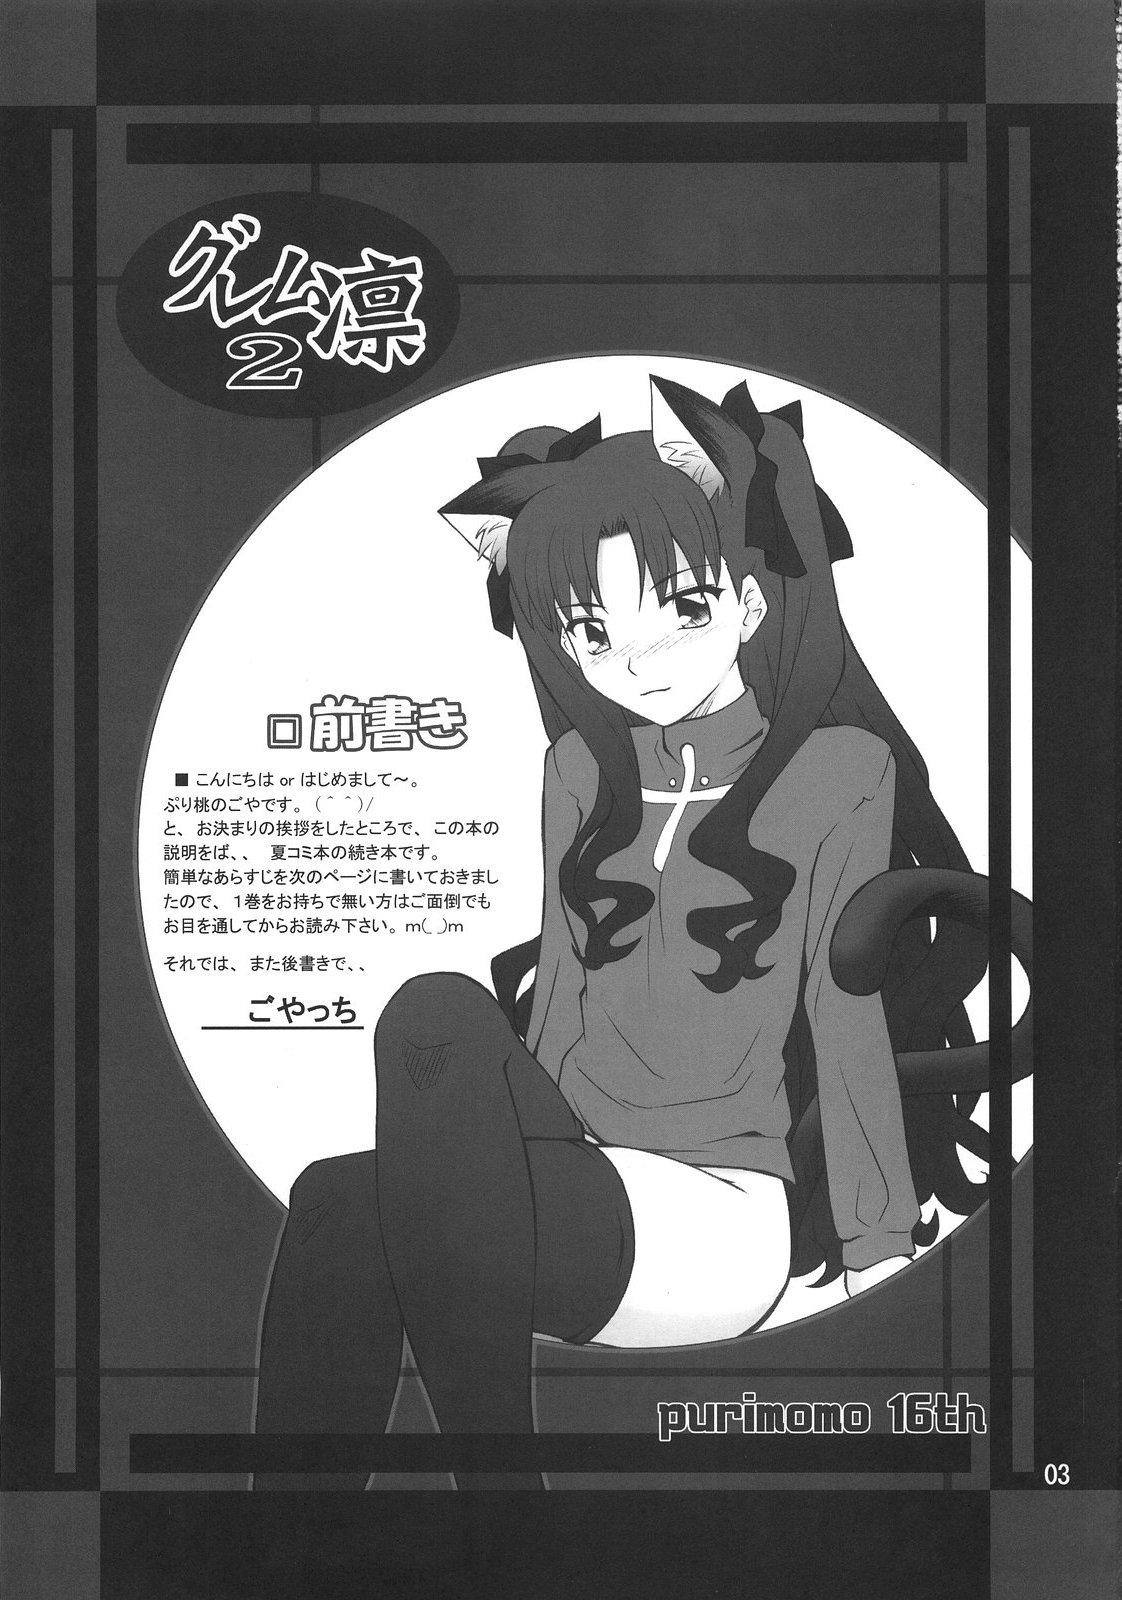 Pelada Grem-Rin 2 - Fate stay night Perfect Ass - Page 2